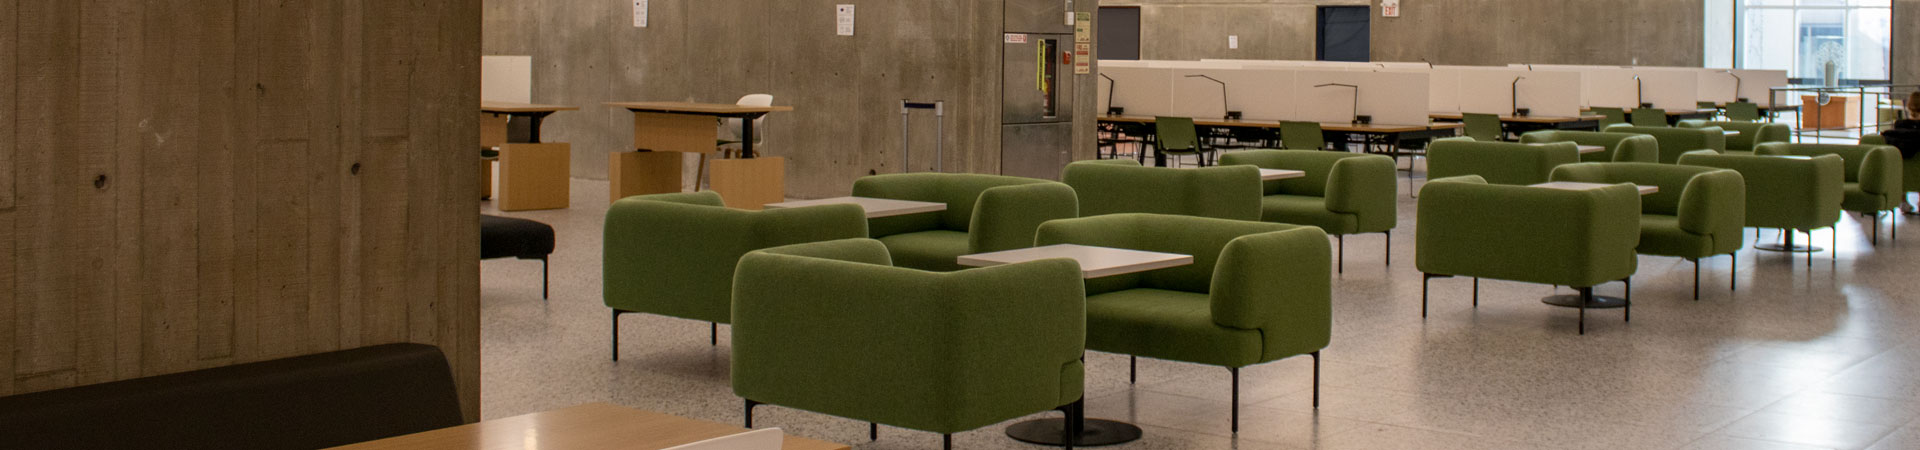 New seating in the Weldon Learning Commons